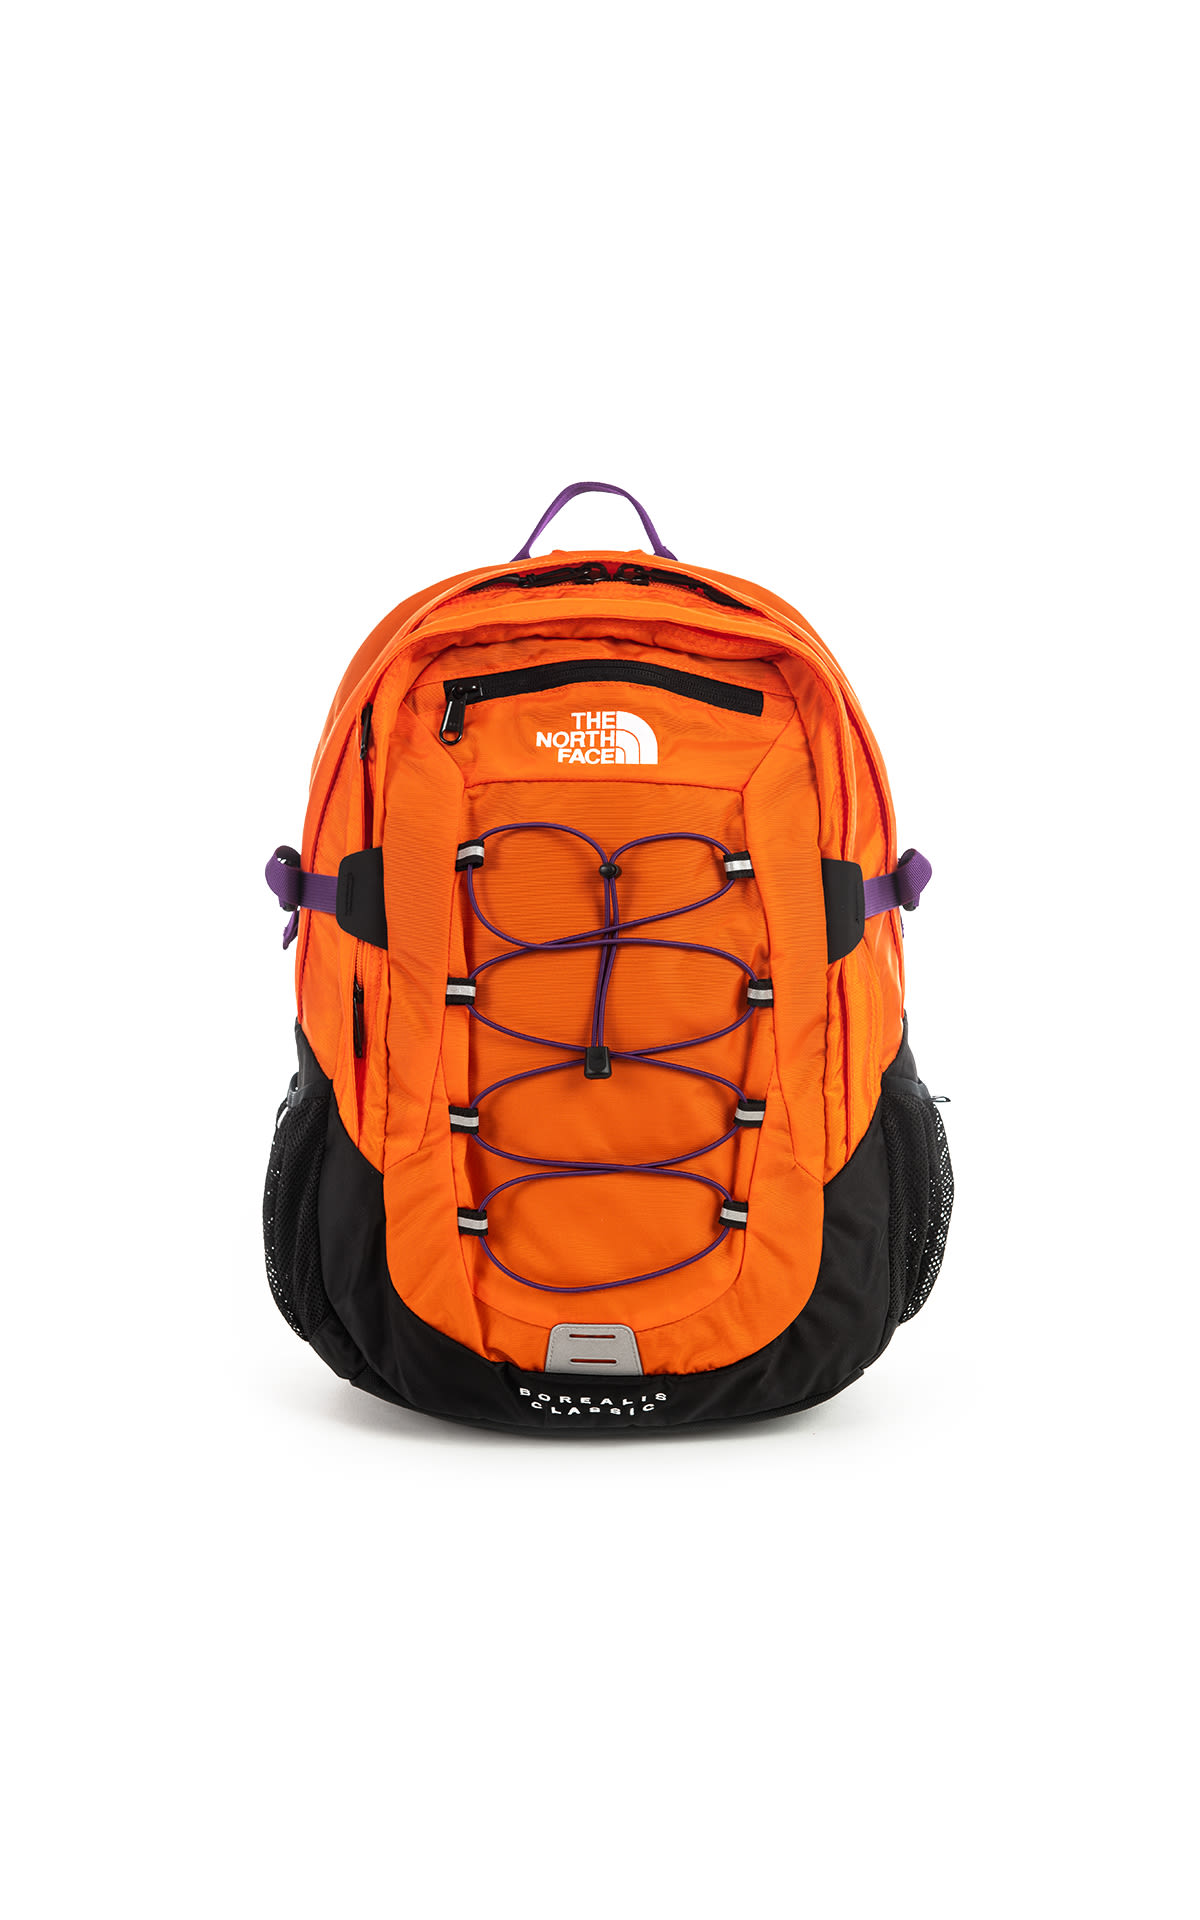 The North Face Sports backpack